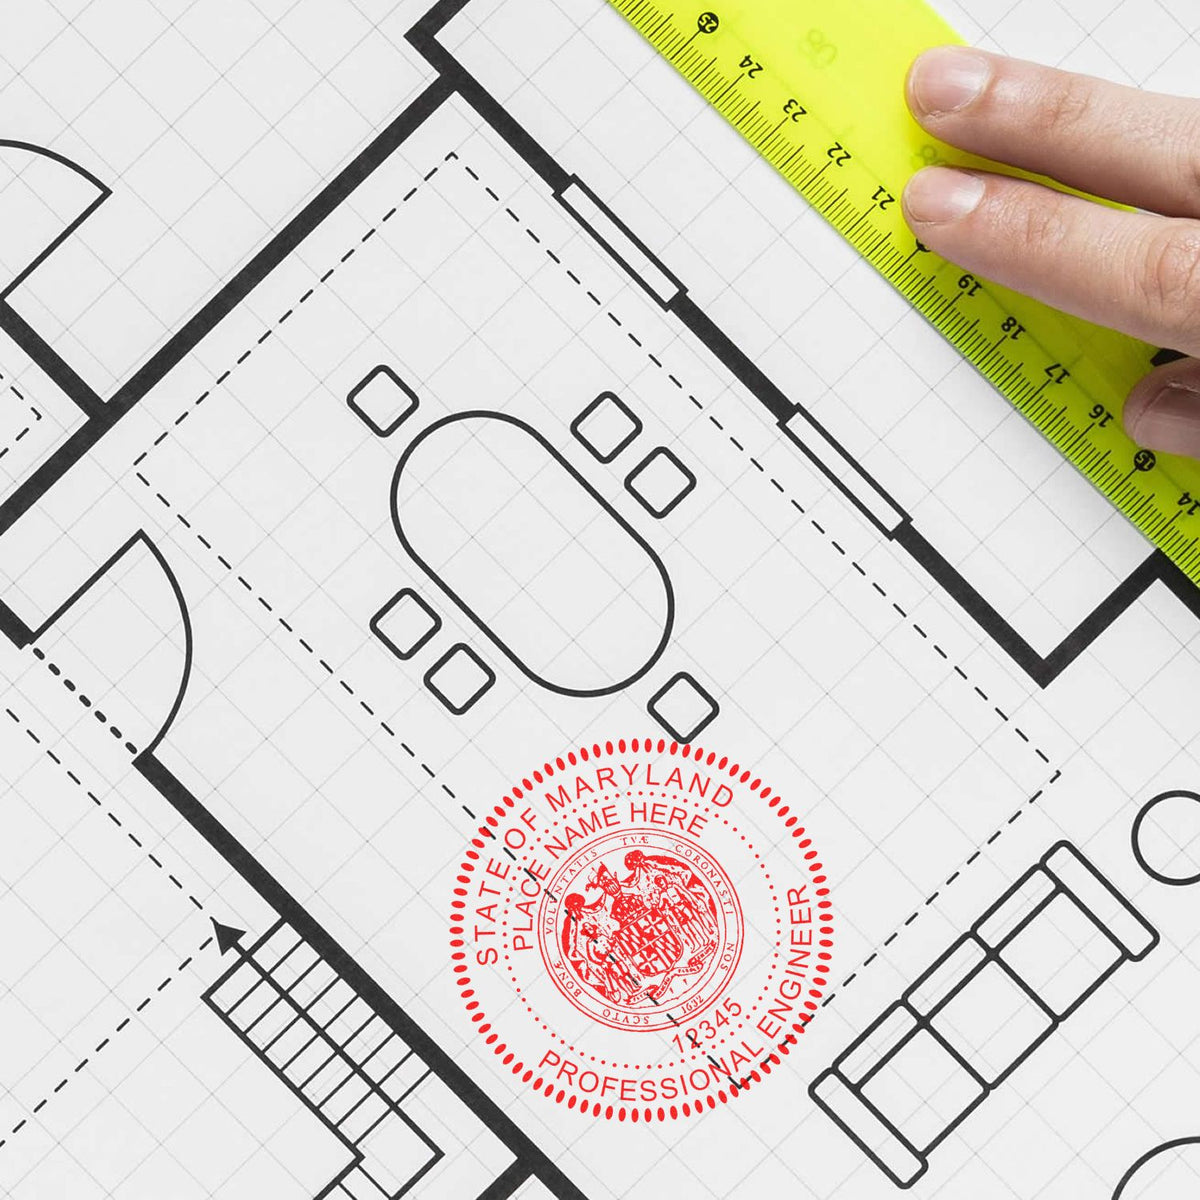 This paper is stamped with a sample imprint of the Digital Maryland PE Stamp and Electronic Seal for Maryland Engineer, signifying its quality and reliability.